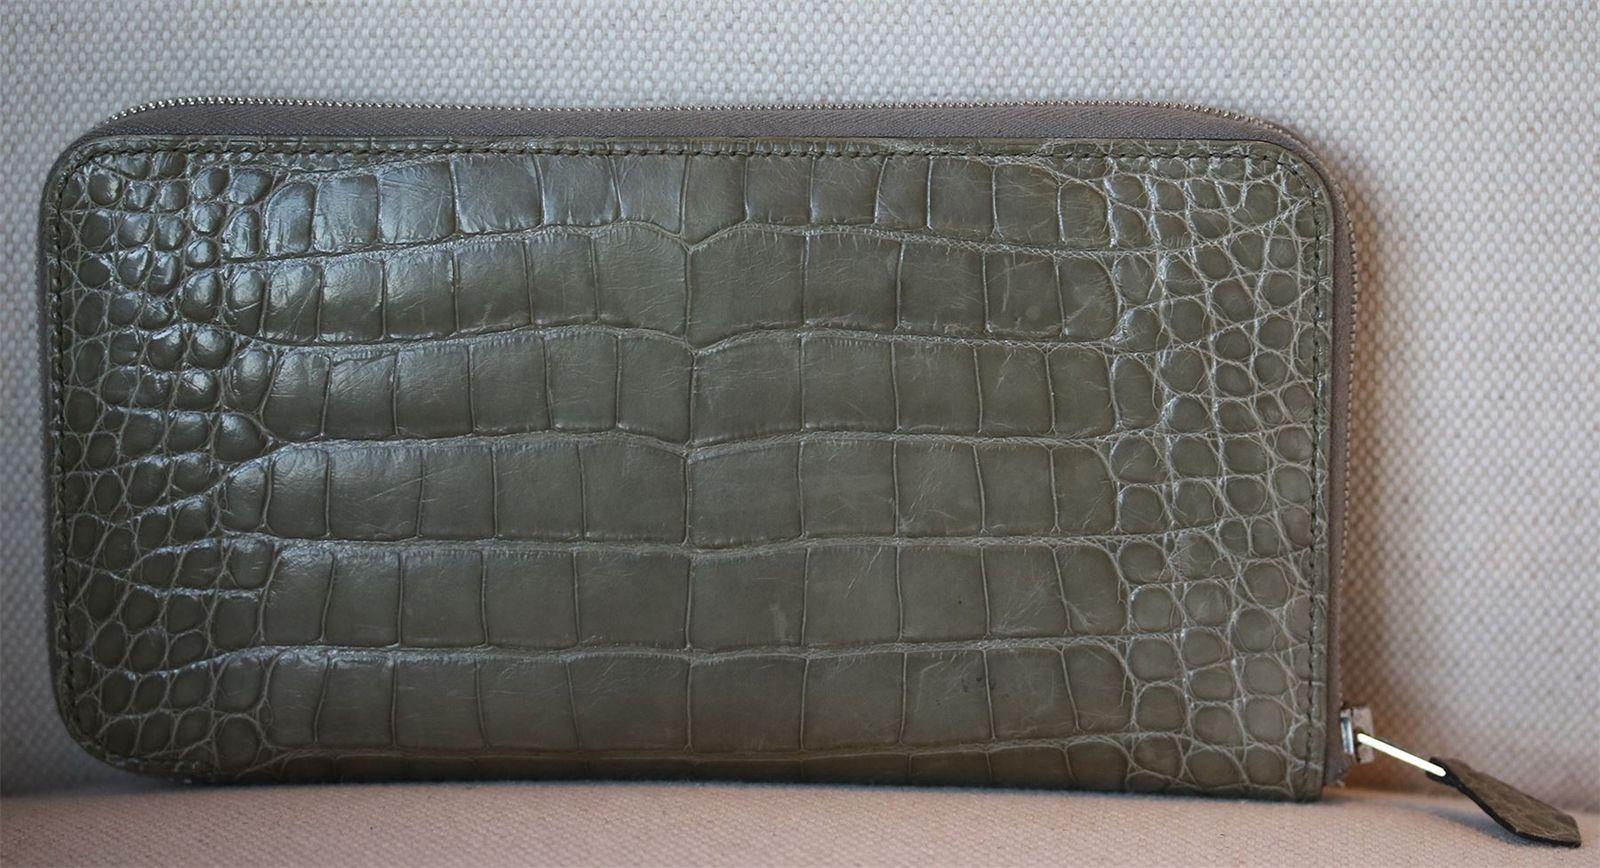 Wallet in crocodile skin, silver- and palladium-plated zip. Inside: ten credit card slots and a zippered change pouch.

Dimensions: Approx. 11 x 20 x 1.5 cm 

Condition: Slight marks to the leather; see pictures. Otherwise, no sign of wear.